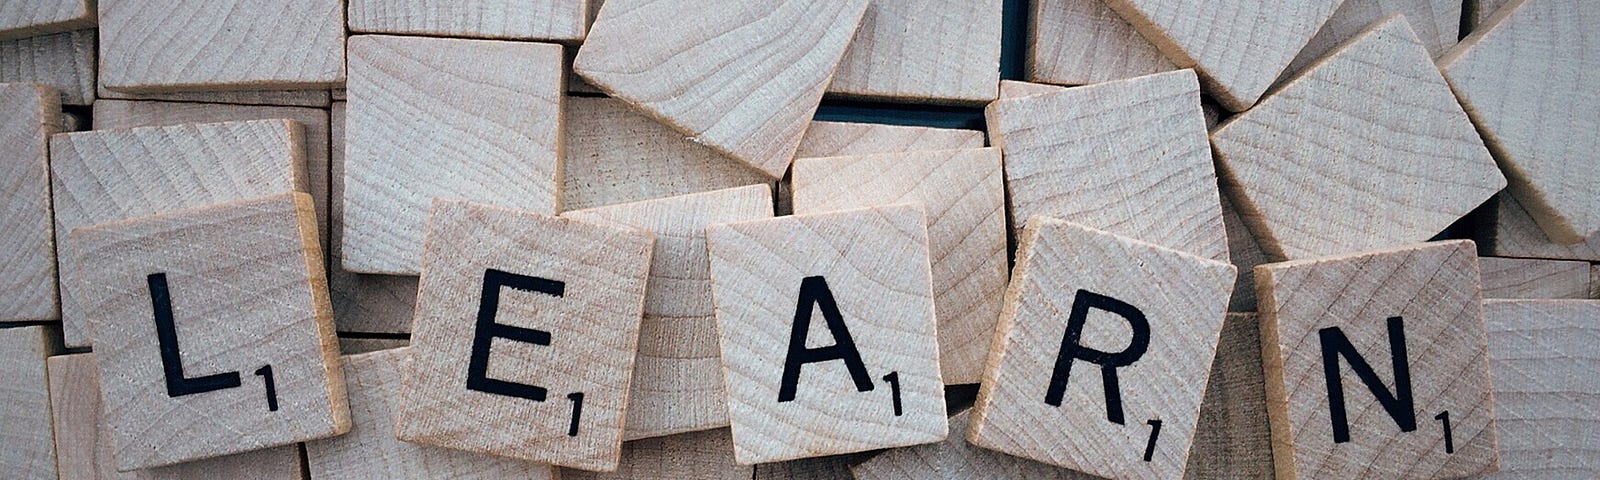 Image of Scrabble tiles that spell the word “learn”.